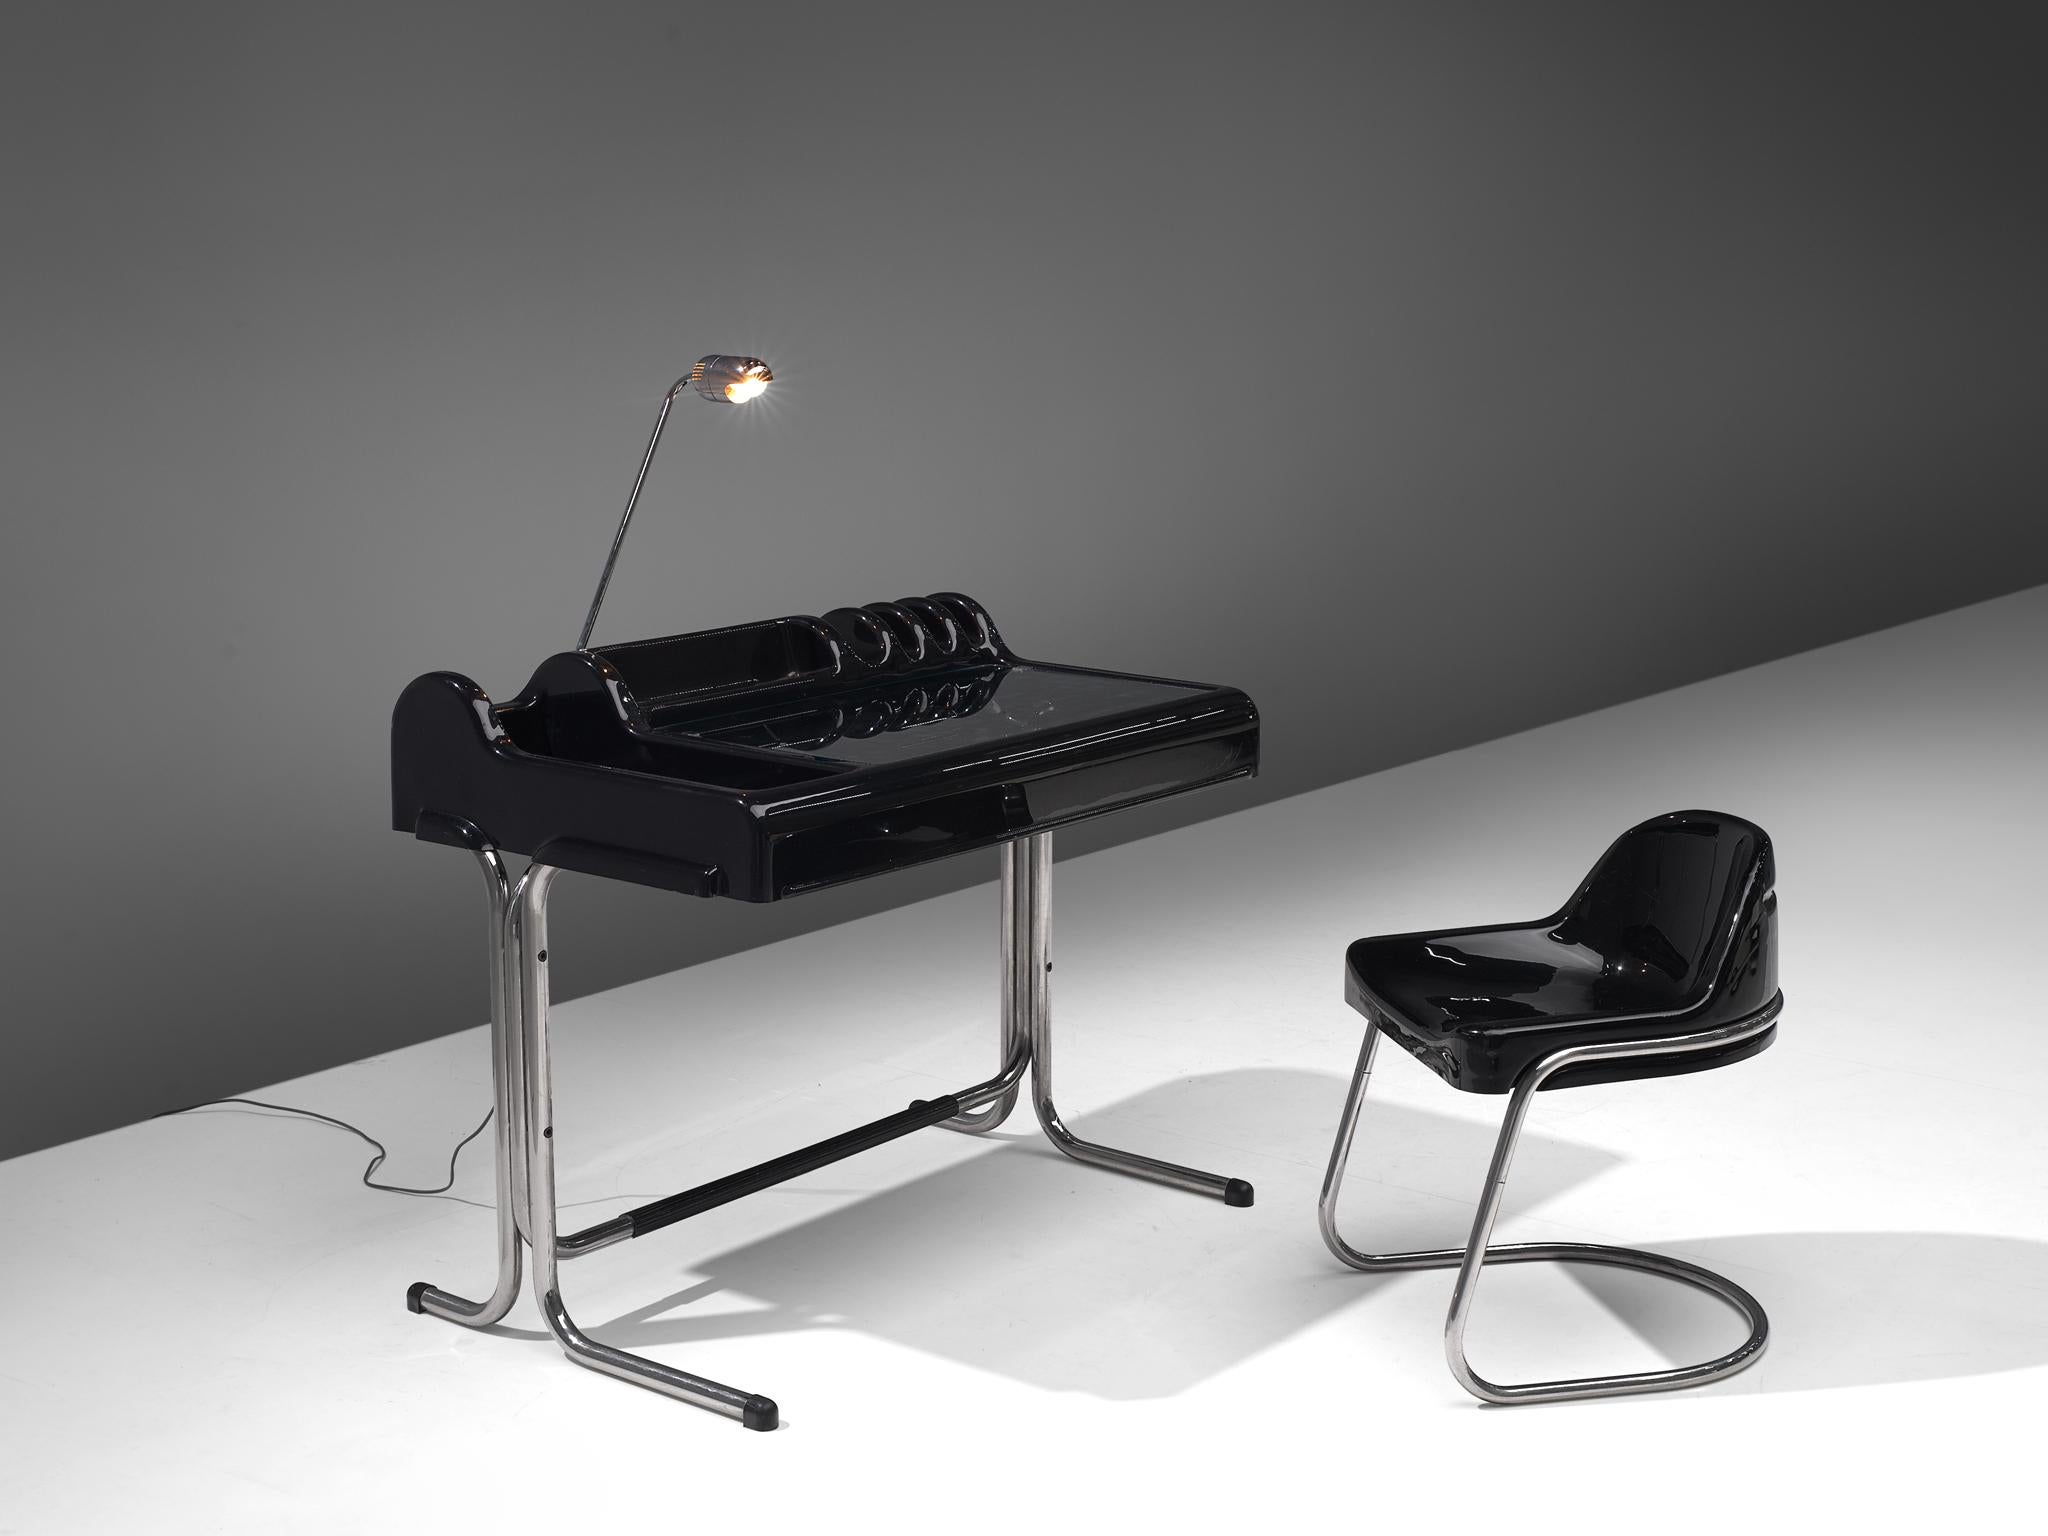 Vittorio Parigi & Nani Prina, 'Orix' desk with chair, polyester and chromed steel, Italy, 1970

Postmodern 'Orix' writing desk with chair designed by Vittorio Parigi and Nani Prina. The set is executed in chromed tubular steel and the top and seat